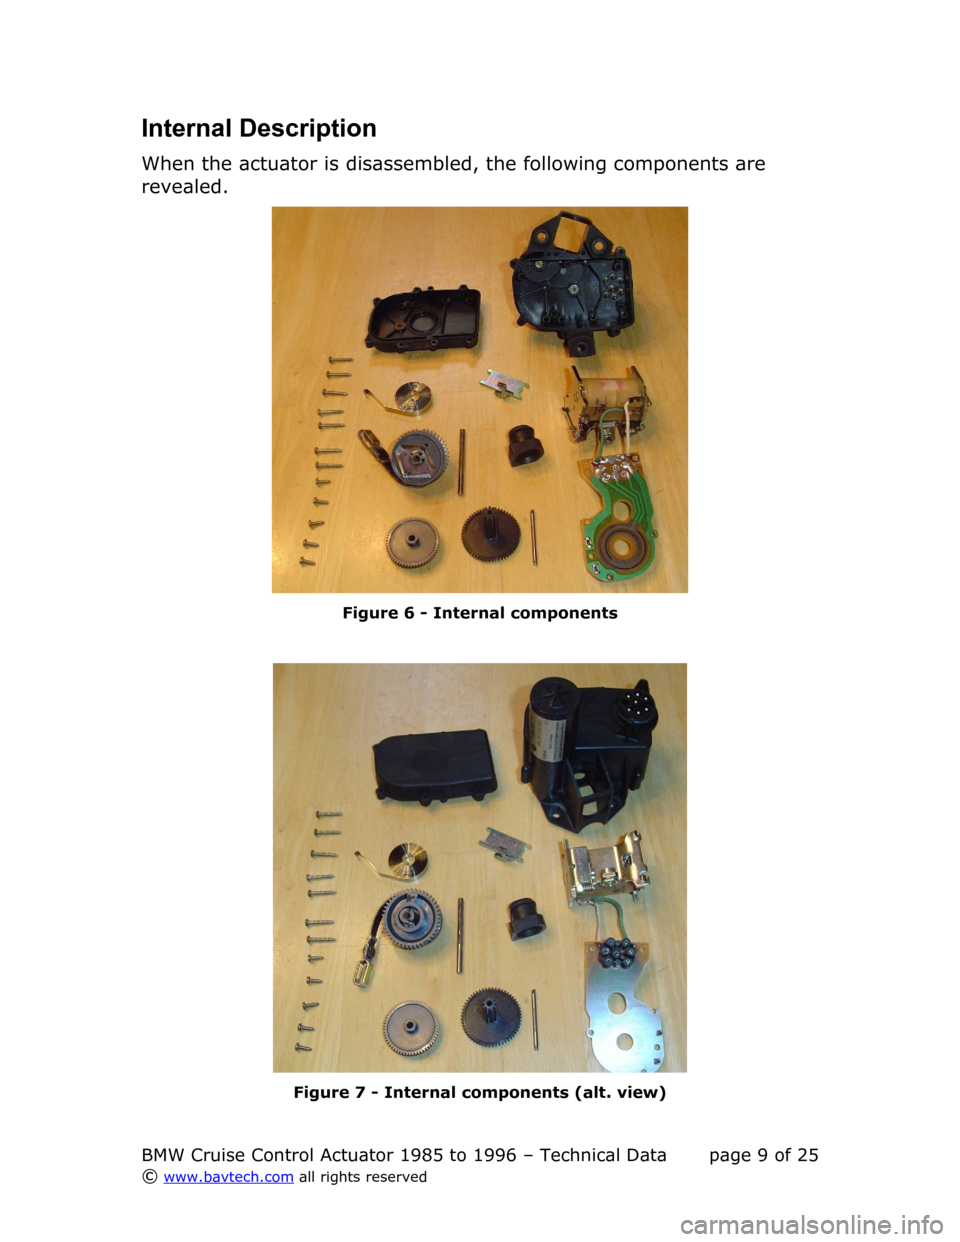 BMW 8 SERIES 1989 E31 Cruise Control Acutator Internal Description
When the actuator is disassembled, the following components are  
revealed.
Figure  6  - Internal components
Figure  7  - Internal components (alt. view)
BMW Cruise Control Actuat